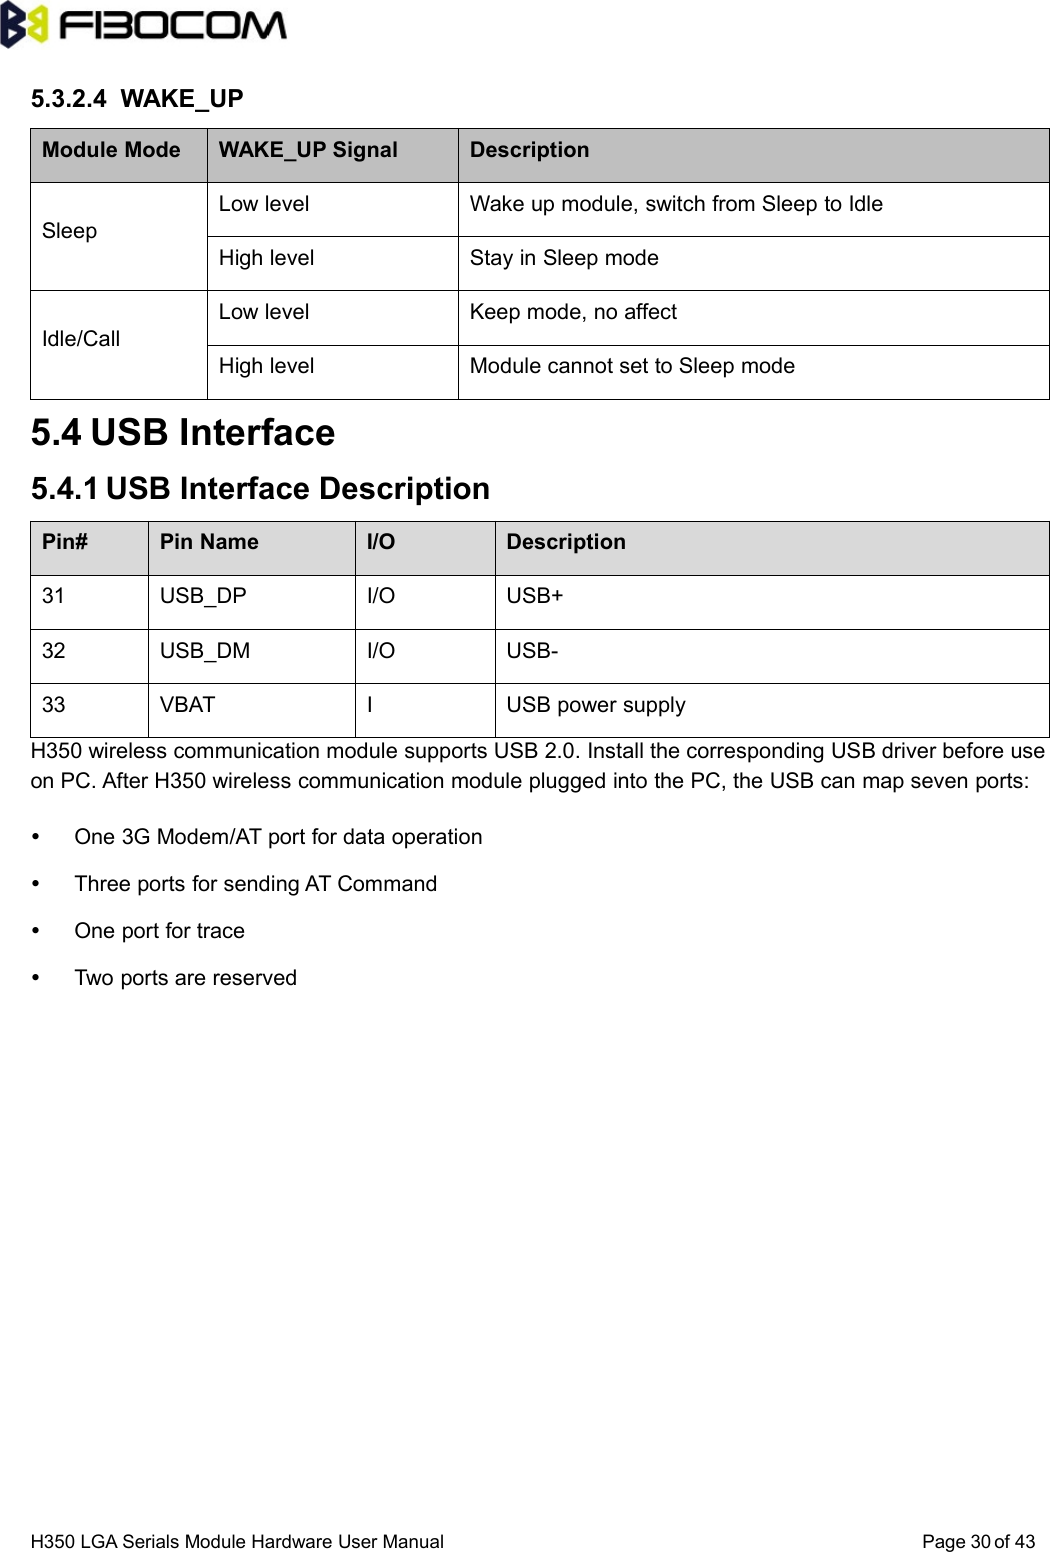 H350 LGA Serials Module Hardware User Manual Page of 43305.3.2.4 WAKE_UPModule Mode WAKE_UP Signal DescriptionSleepLow level Wake up module, switch from Sleep to IdleHigh level Stay in Sleep modeIdle/CallLow level Keep mode, no affectHigh level Module cannot set to Sleep mode5.4 USB Interface5.4.1 USB Interface DescriptionPin# Pin Name I/O Description31 USB_DP I/O USB+32 USB_DM I/O USB-33 VBAT I USB power supplyH350 wireless communication module supports USB 2.0. Install the corresponding USB driver before useon PC. After H350 wireless communication module plugged into the PC, the USB can map seven ports:One 3G Modem/AT port for data operationThree ports for sending AT CommandOne port for traceTwo ports are reserved